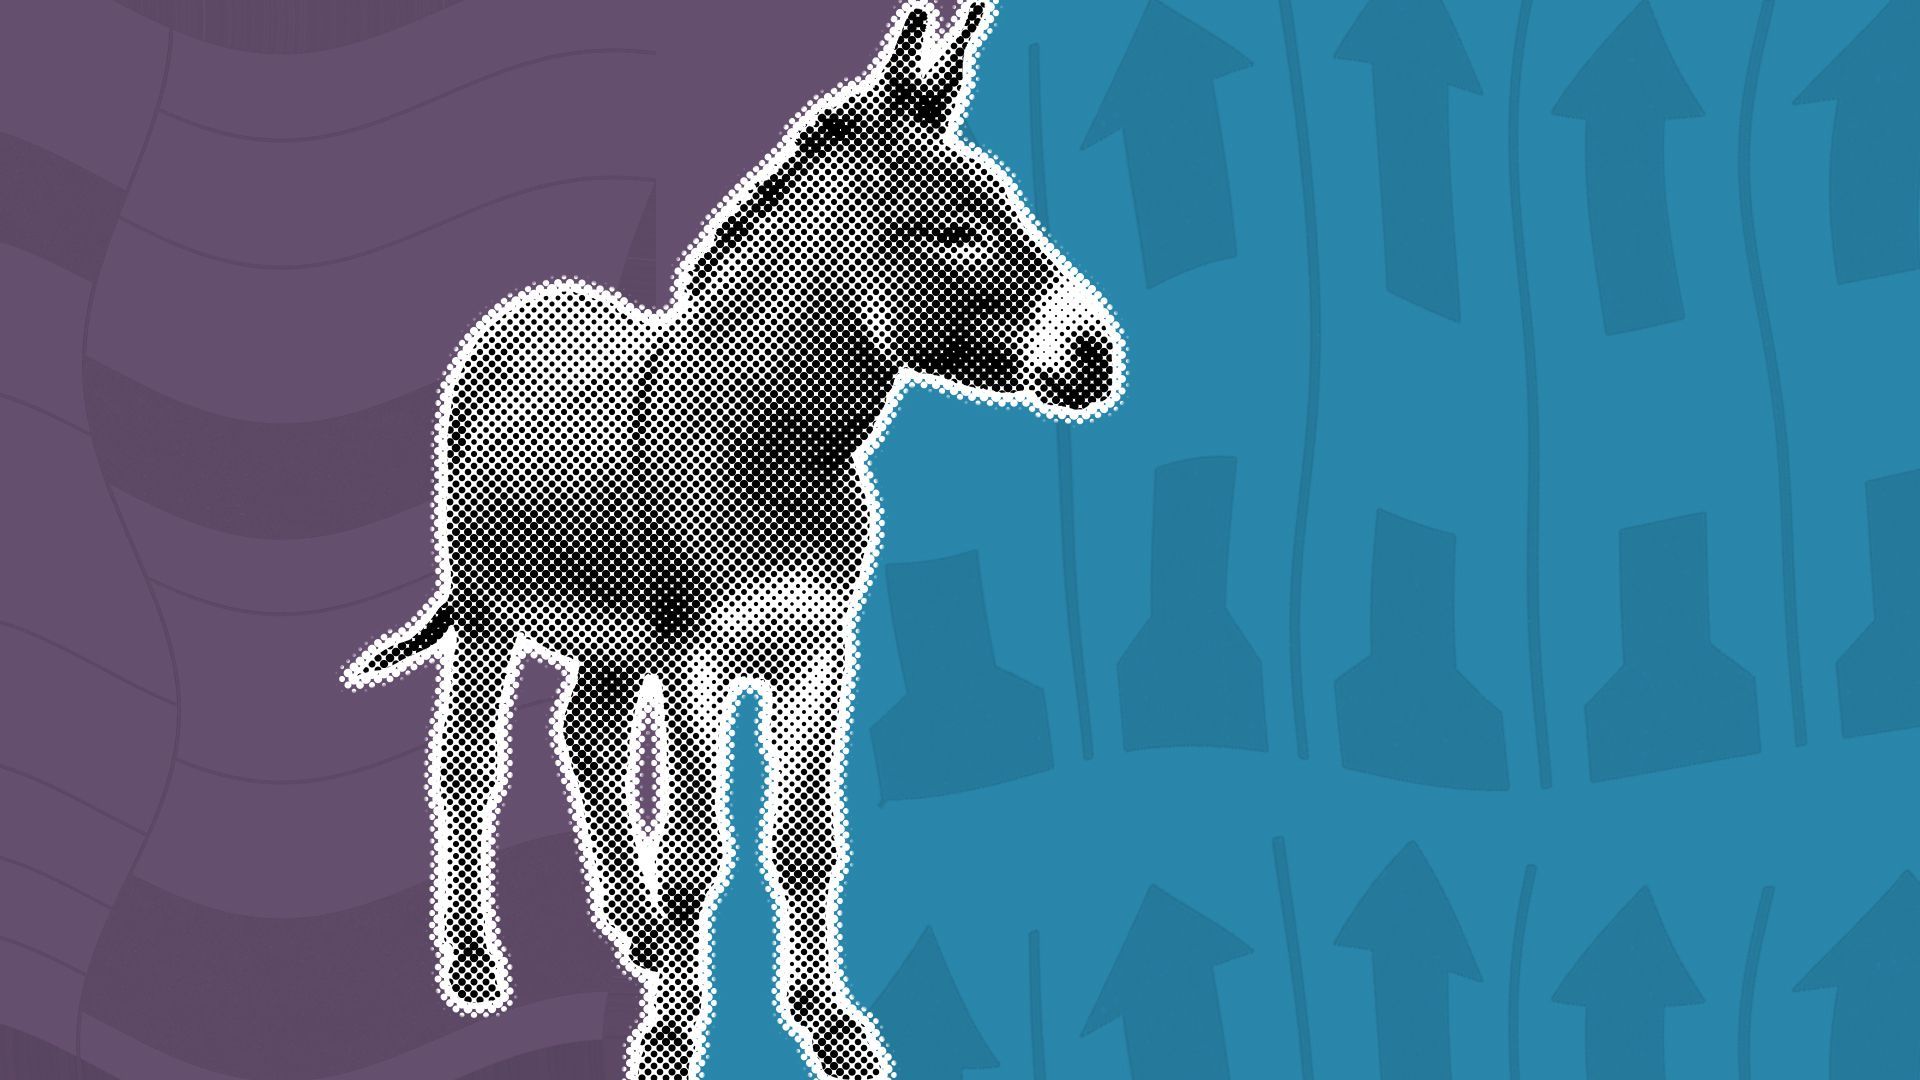 Illustration of a donkey with ballot elements that are distorted and wavy behind it